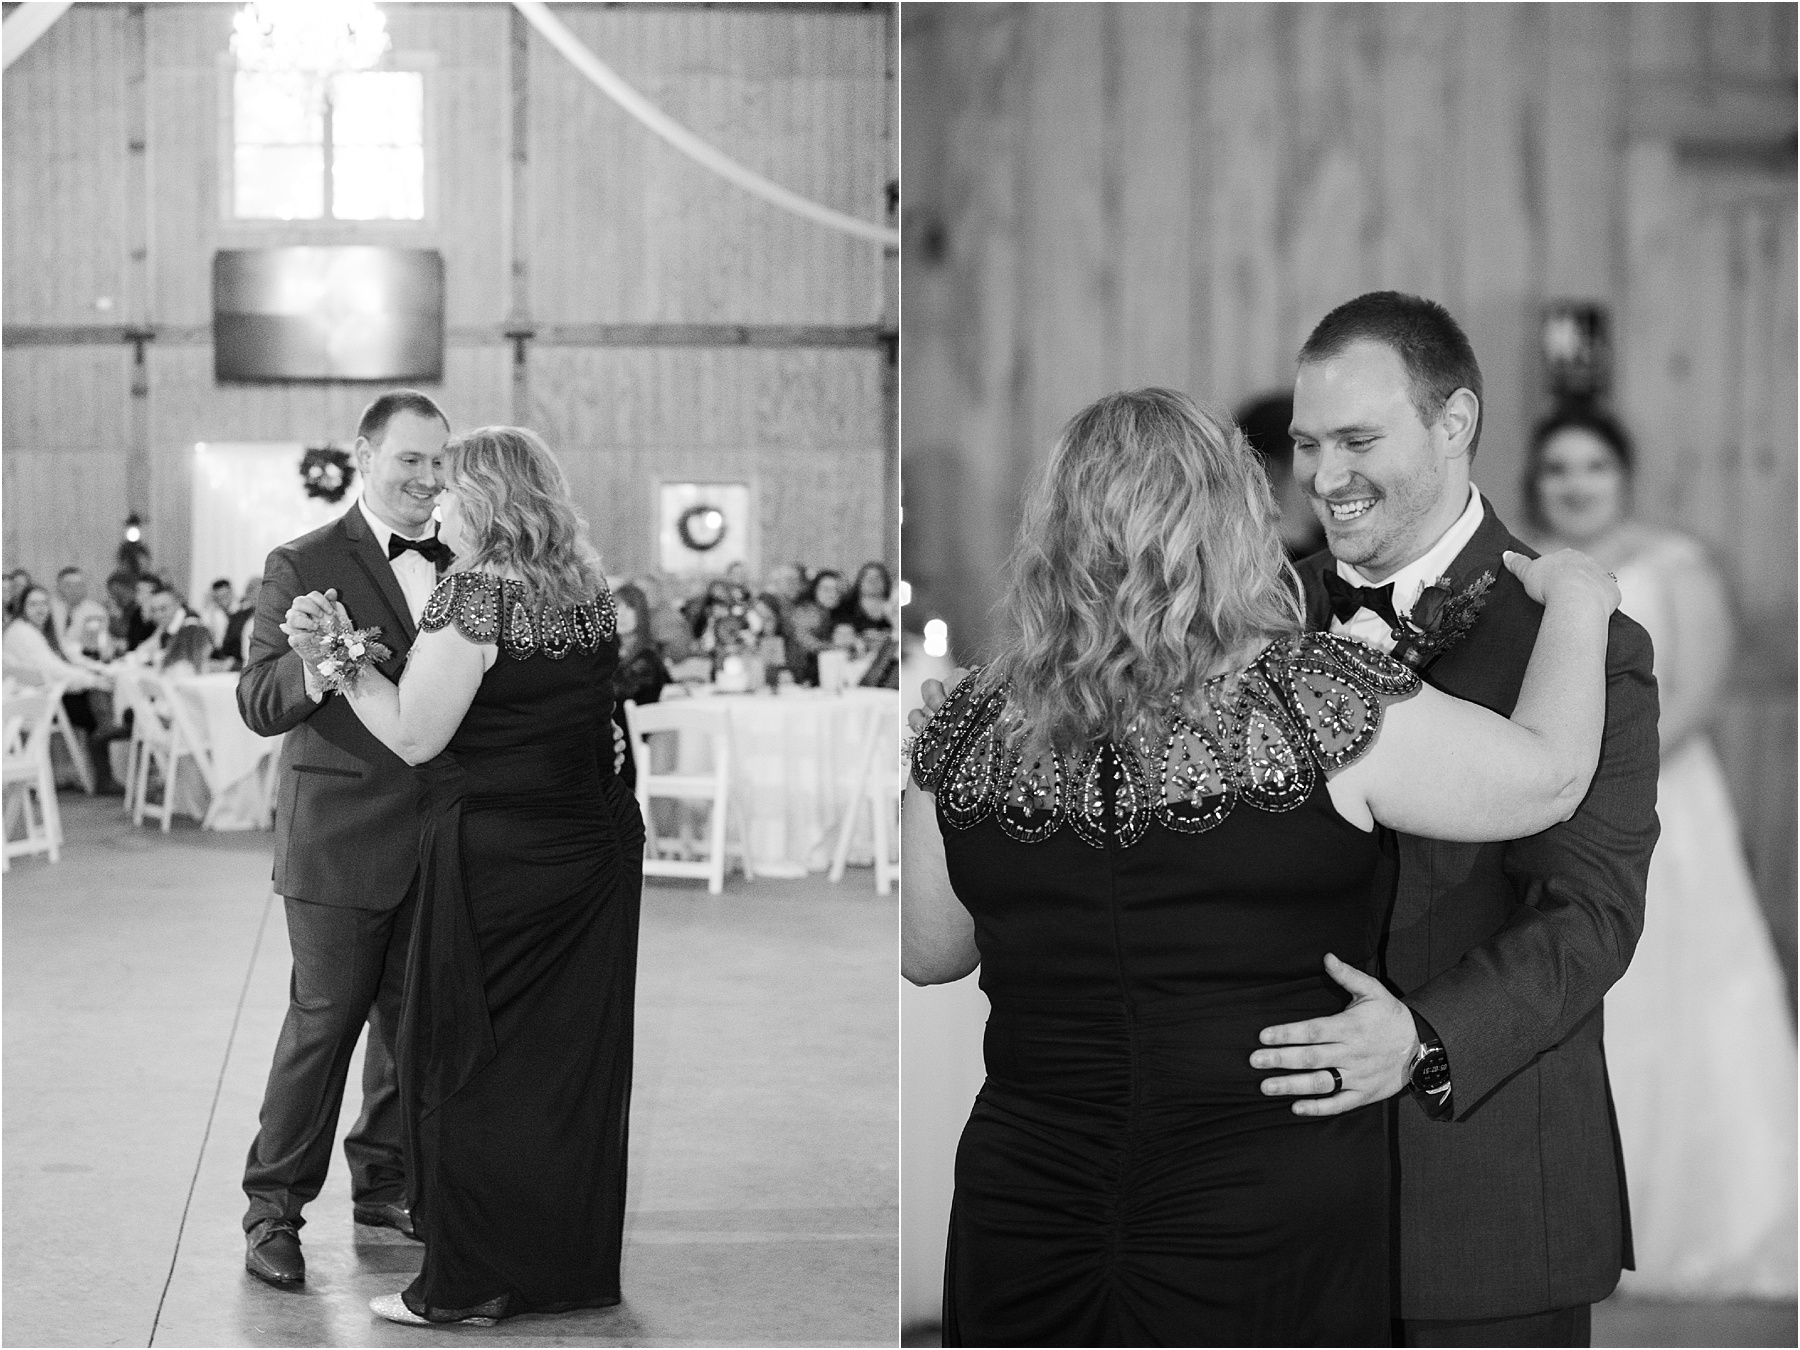 mother and son dance at wedding reception